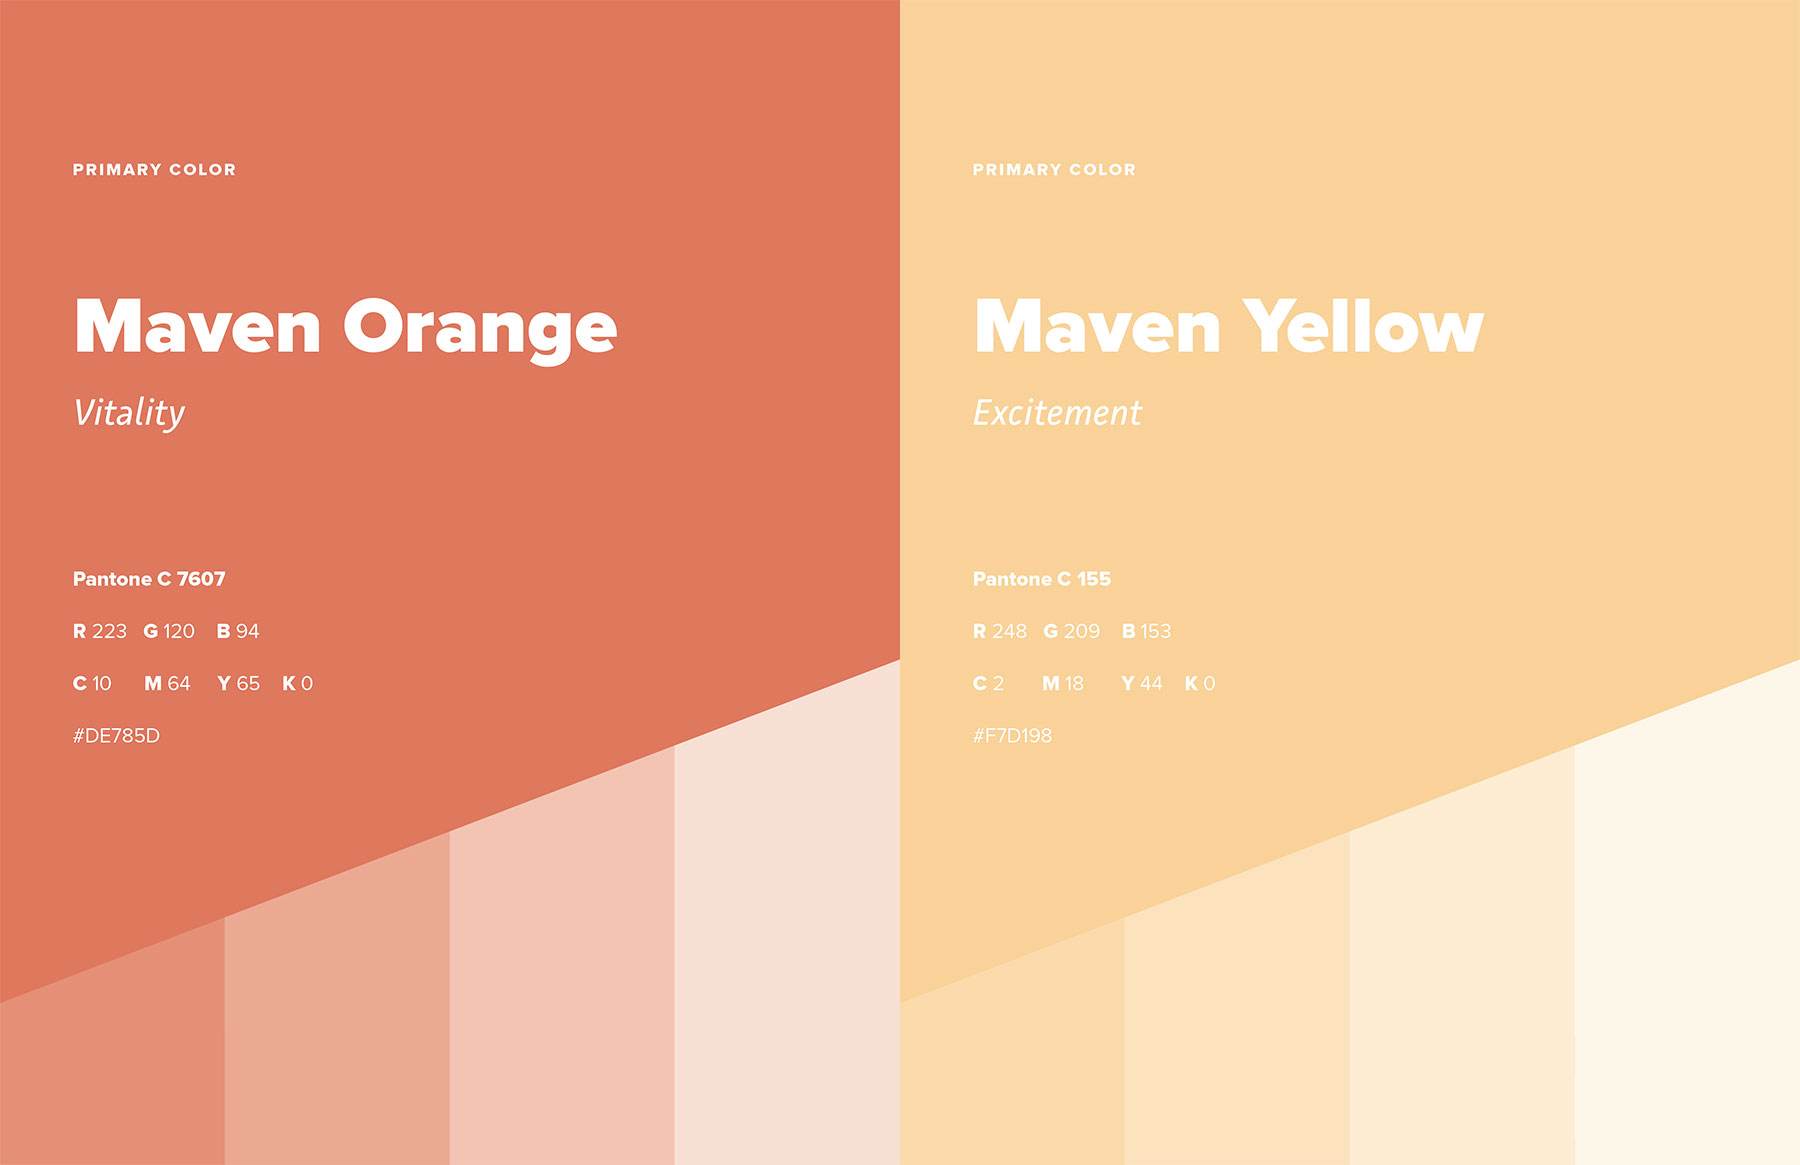 TrackMaven Brand Guidelines